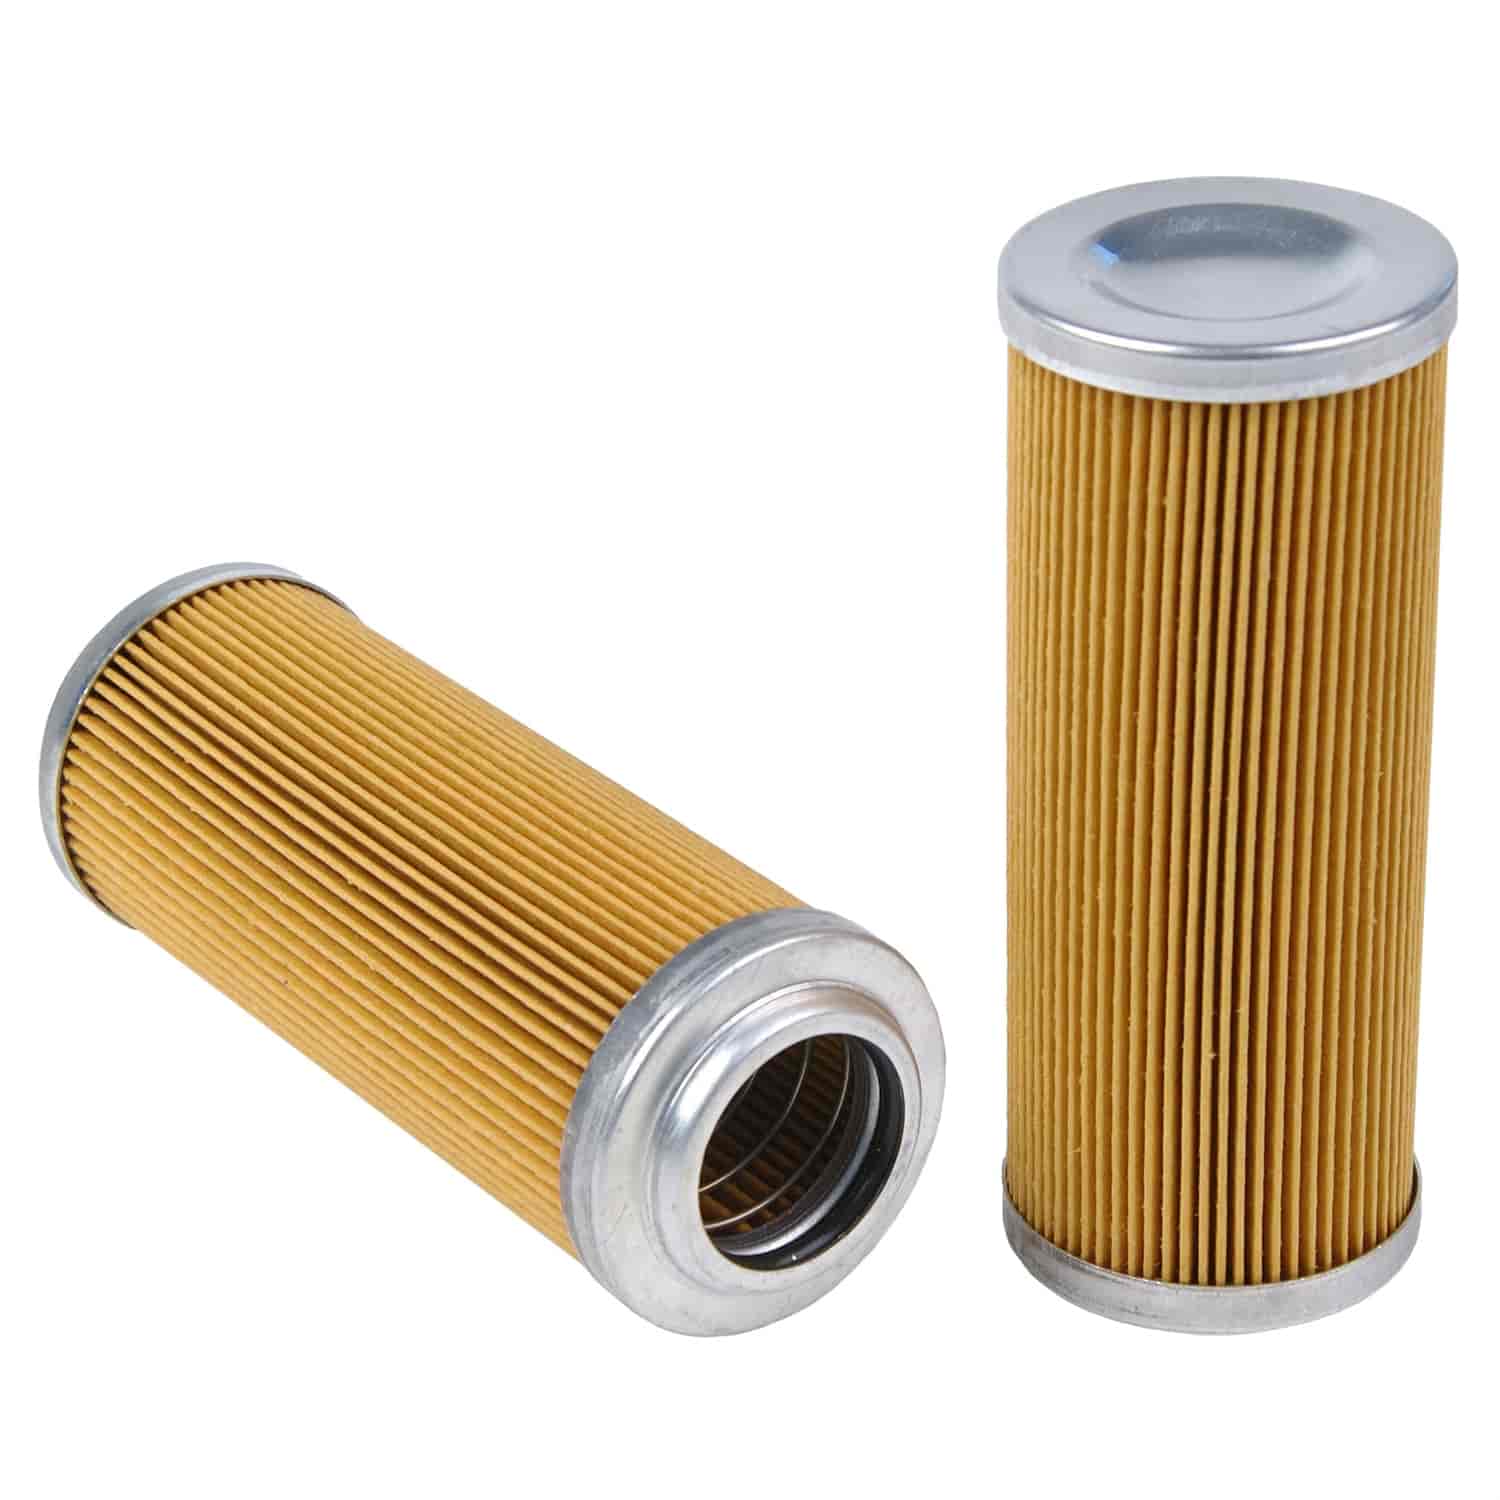 Replacement Fuel Filter Element 10 micron for part